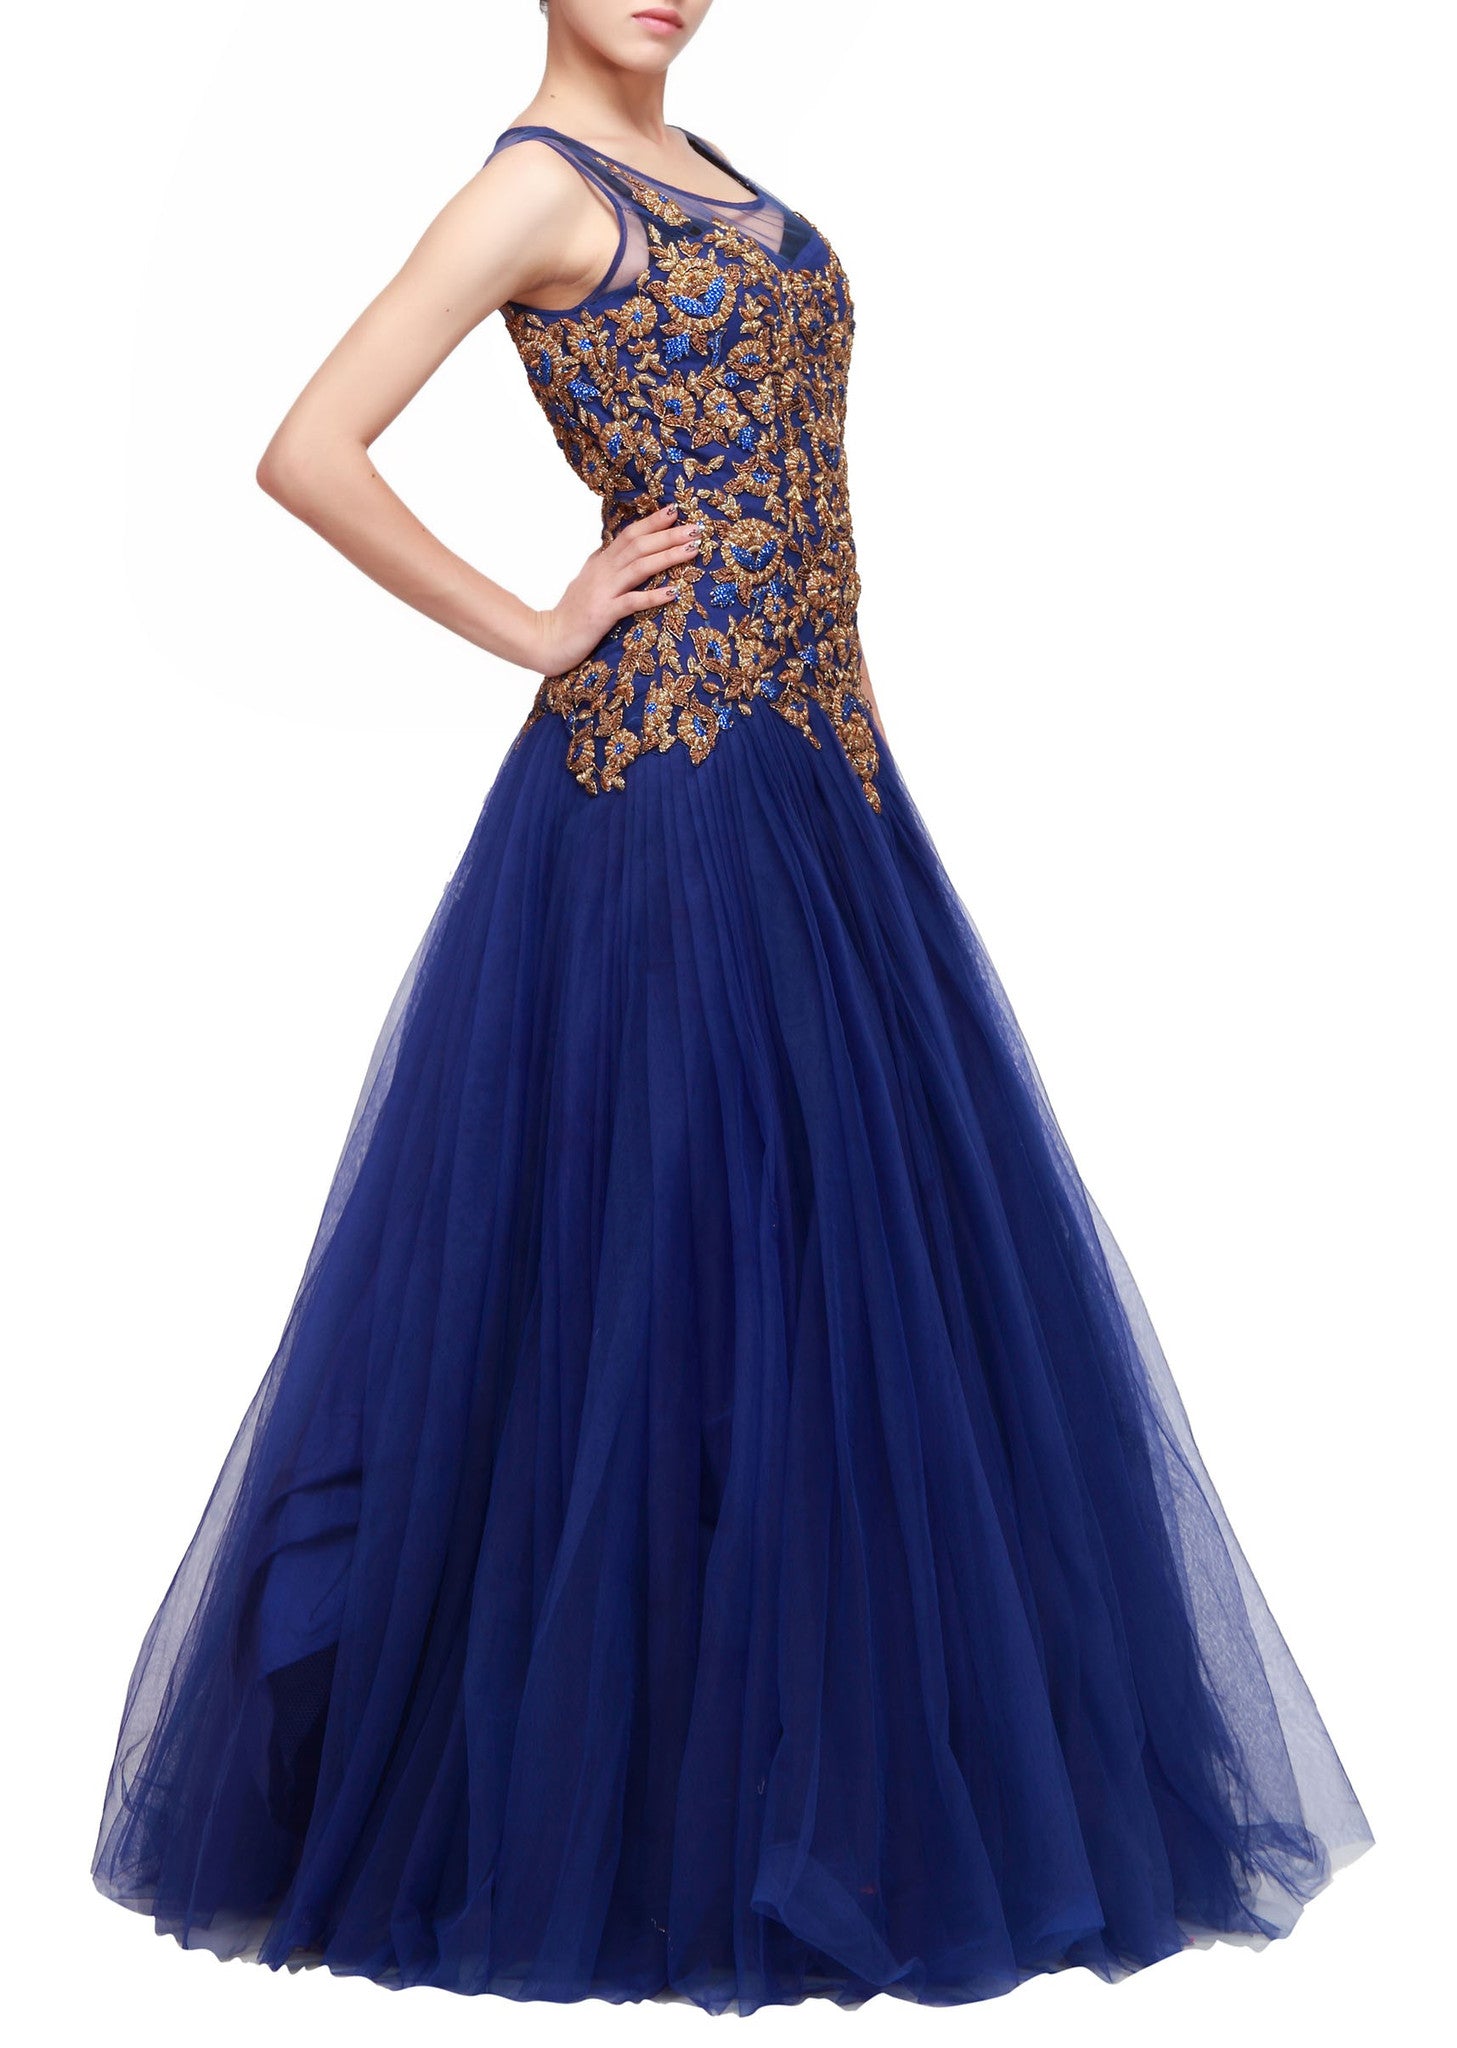 Gown : Blue georgette bandhni printed gown